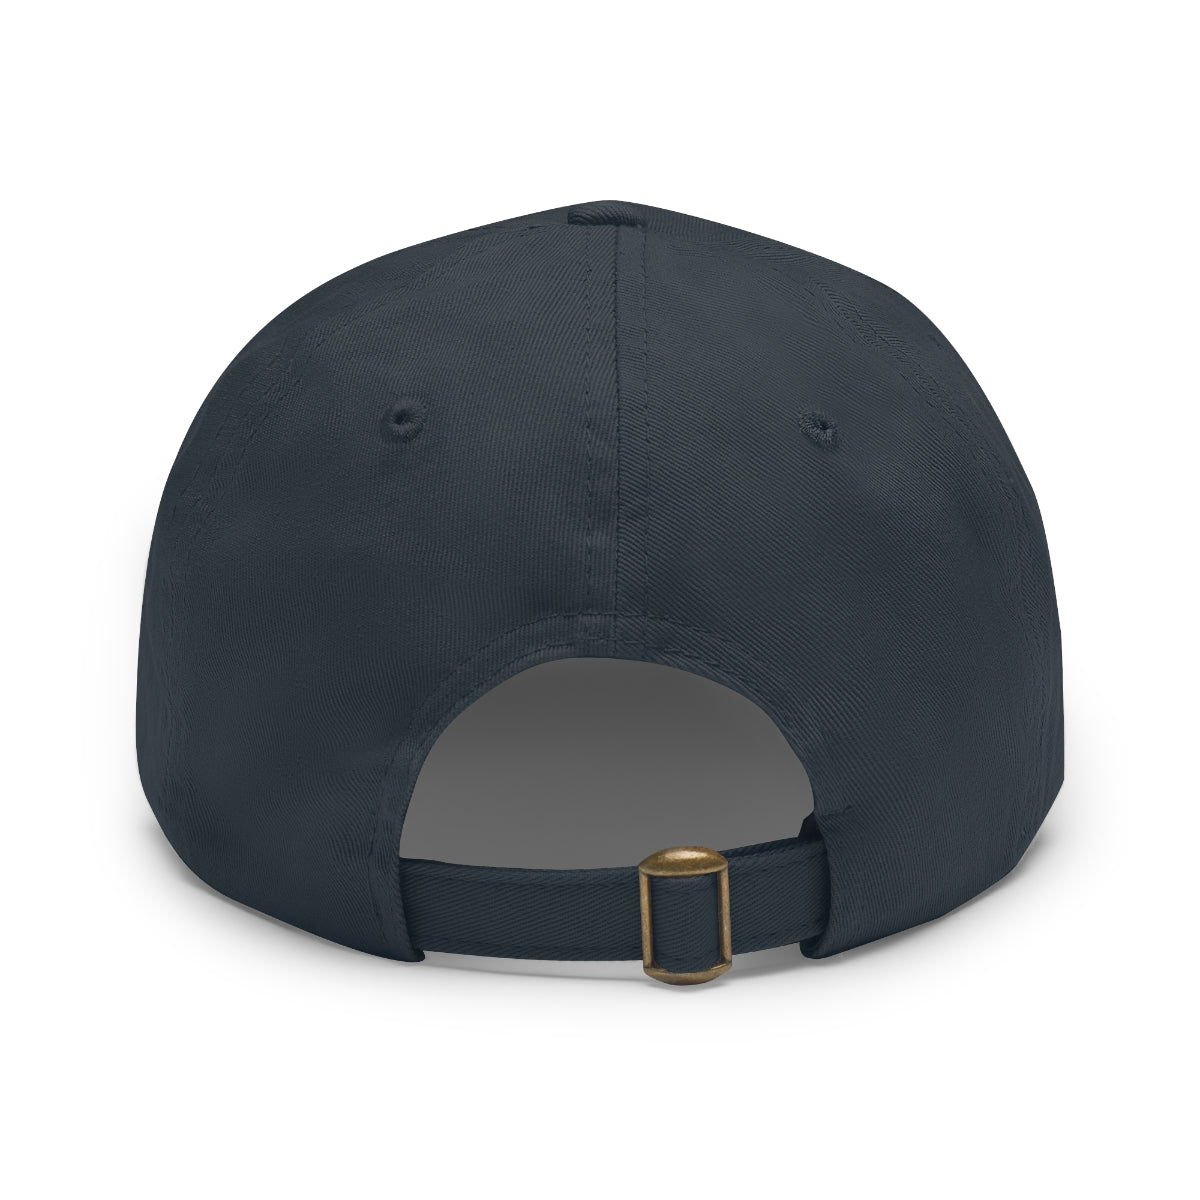 SBU 11 v1 Hat with Leather Patch (Gold)